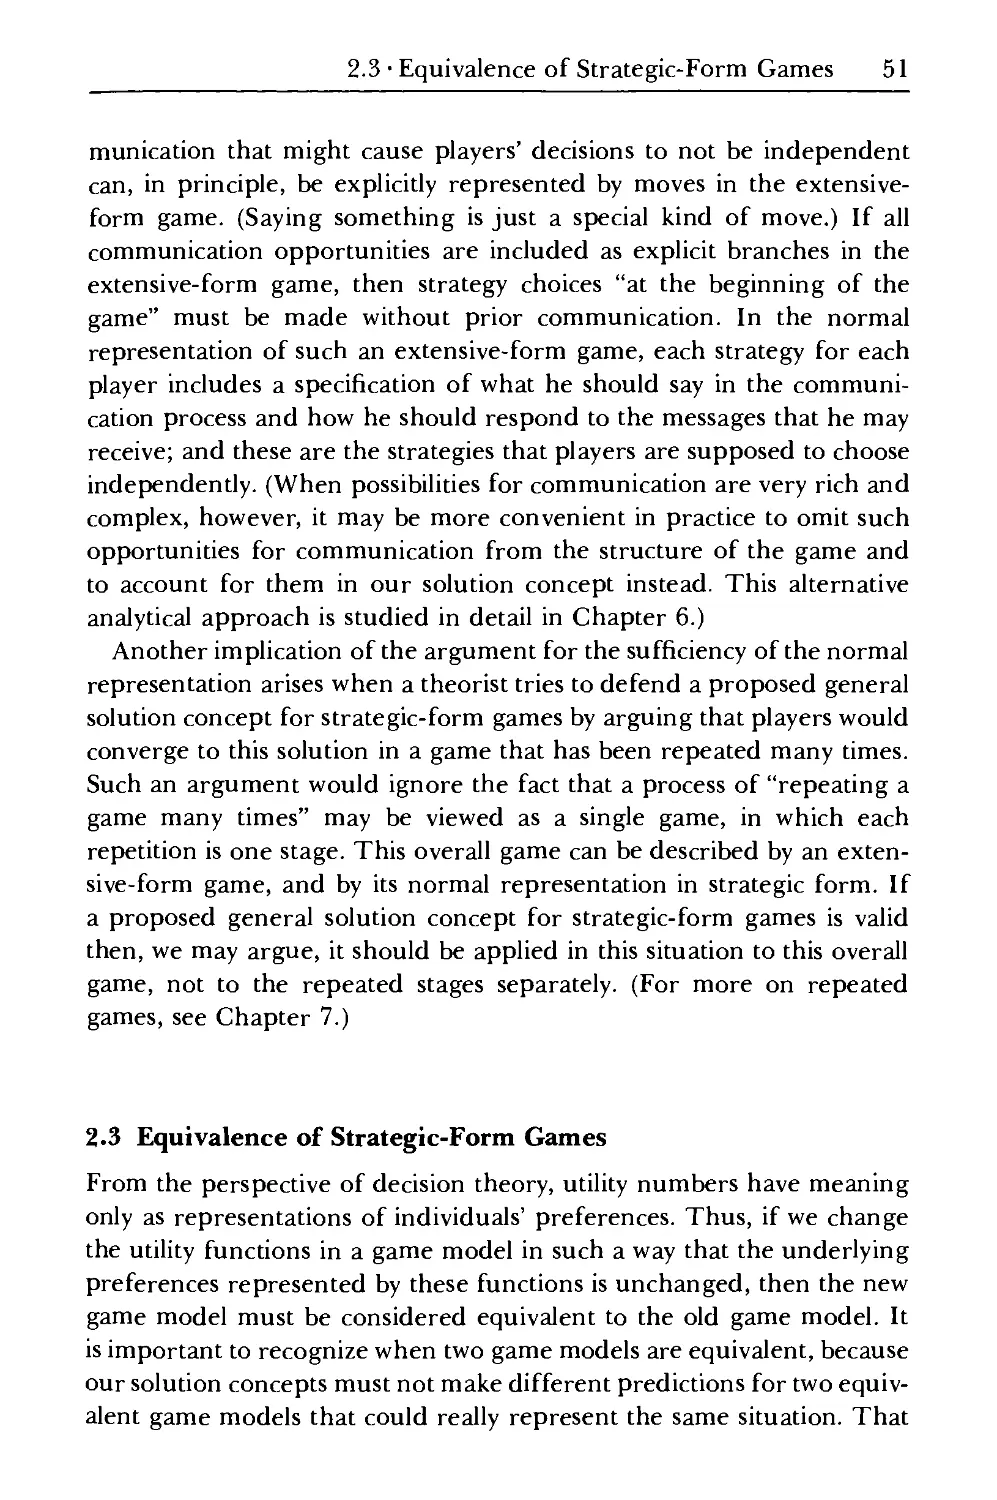 2.3 Equivalence of Strategic-Form Games